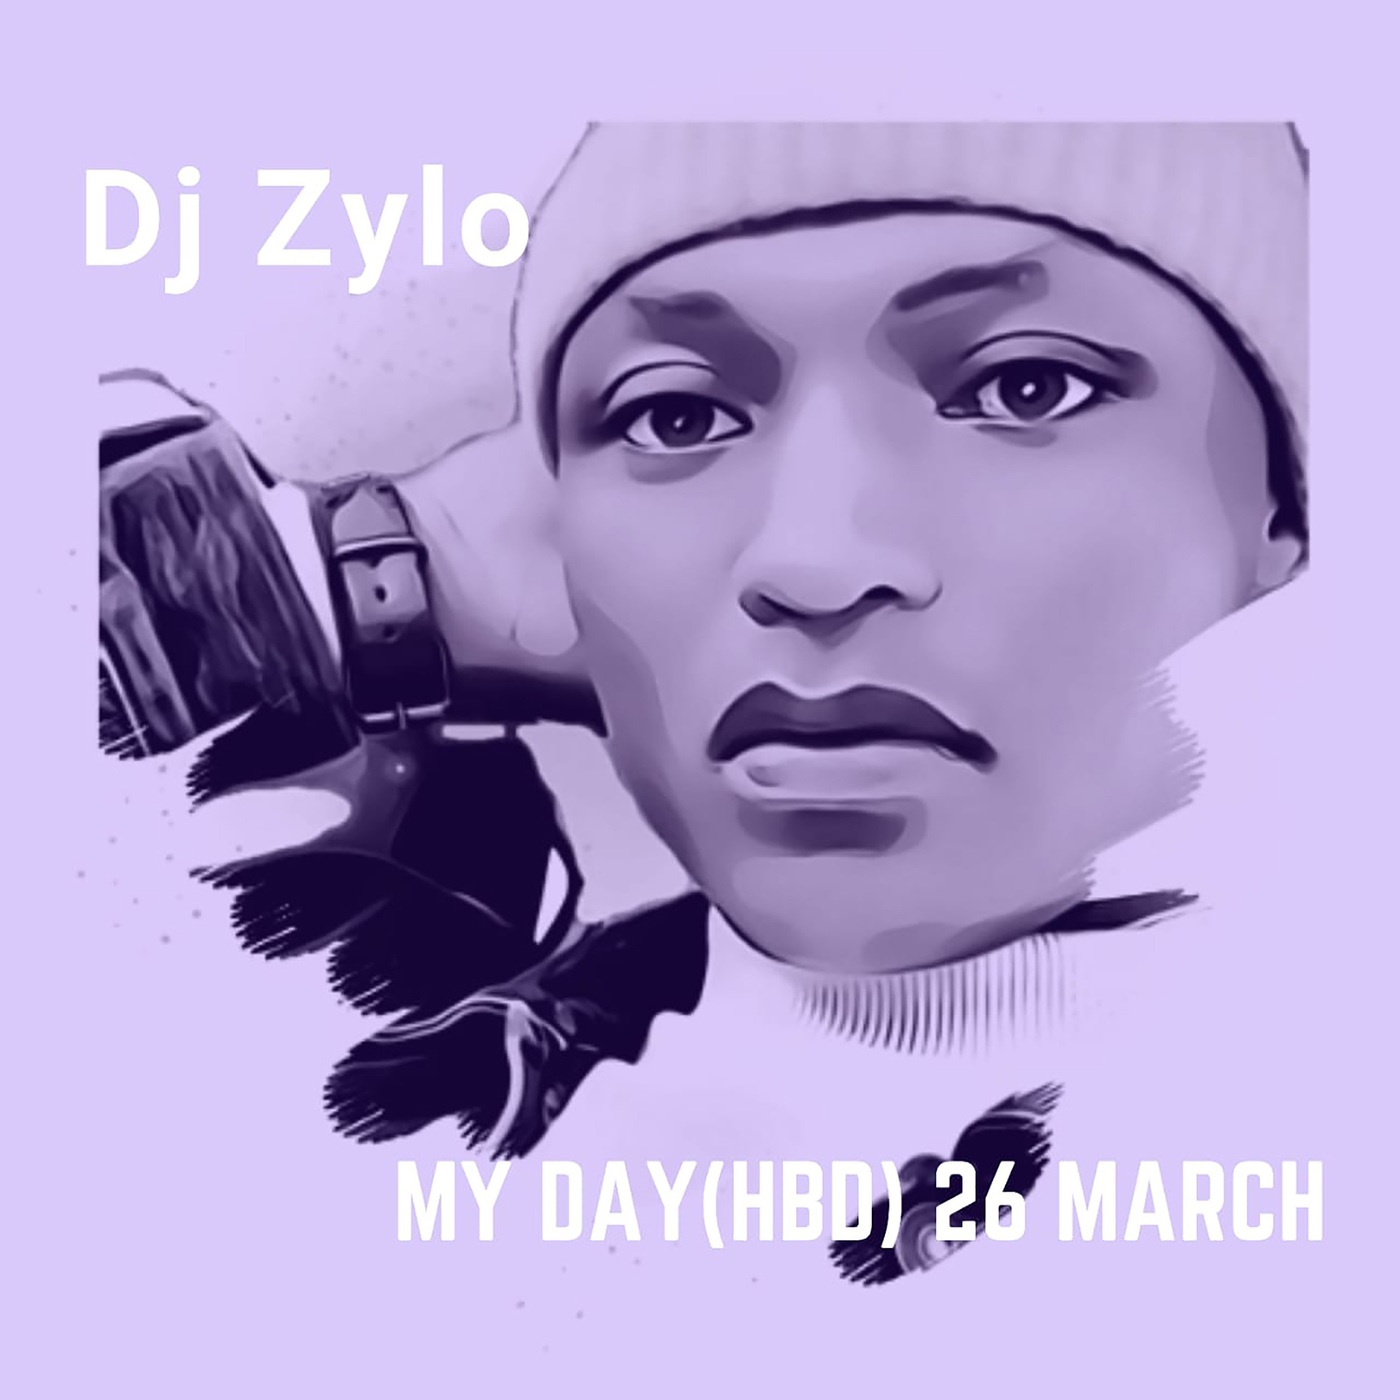 Dj Zylo - My Day (HBD) 26 March [LAP123]